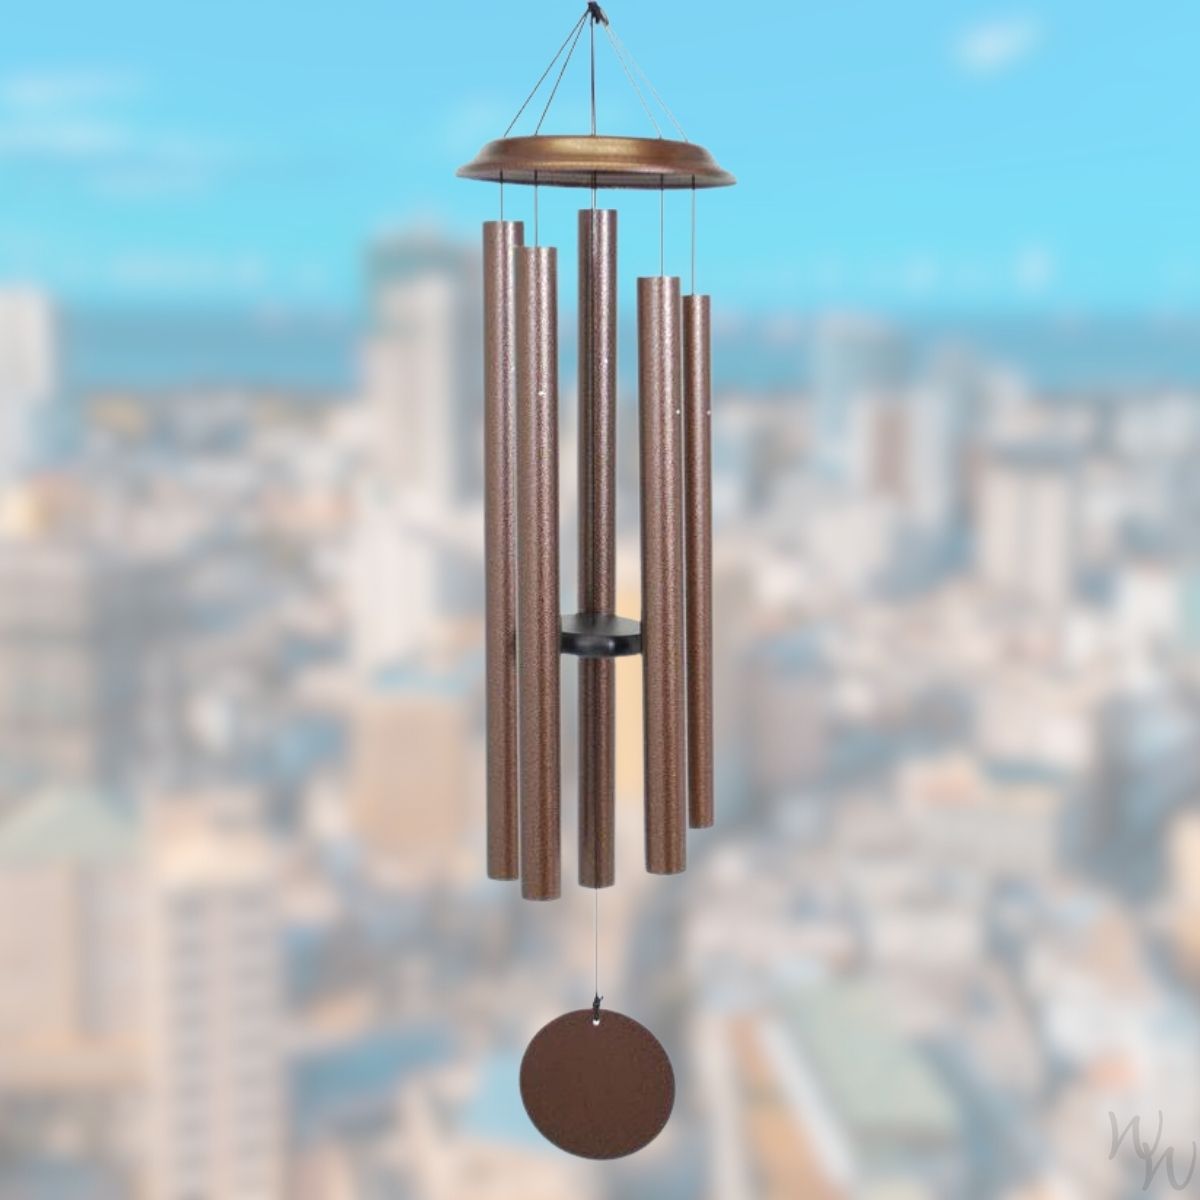 Shenandoah Melodies 59 Inch Copper Vein Wind Chime - Scale Of G